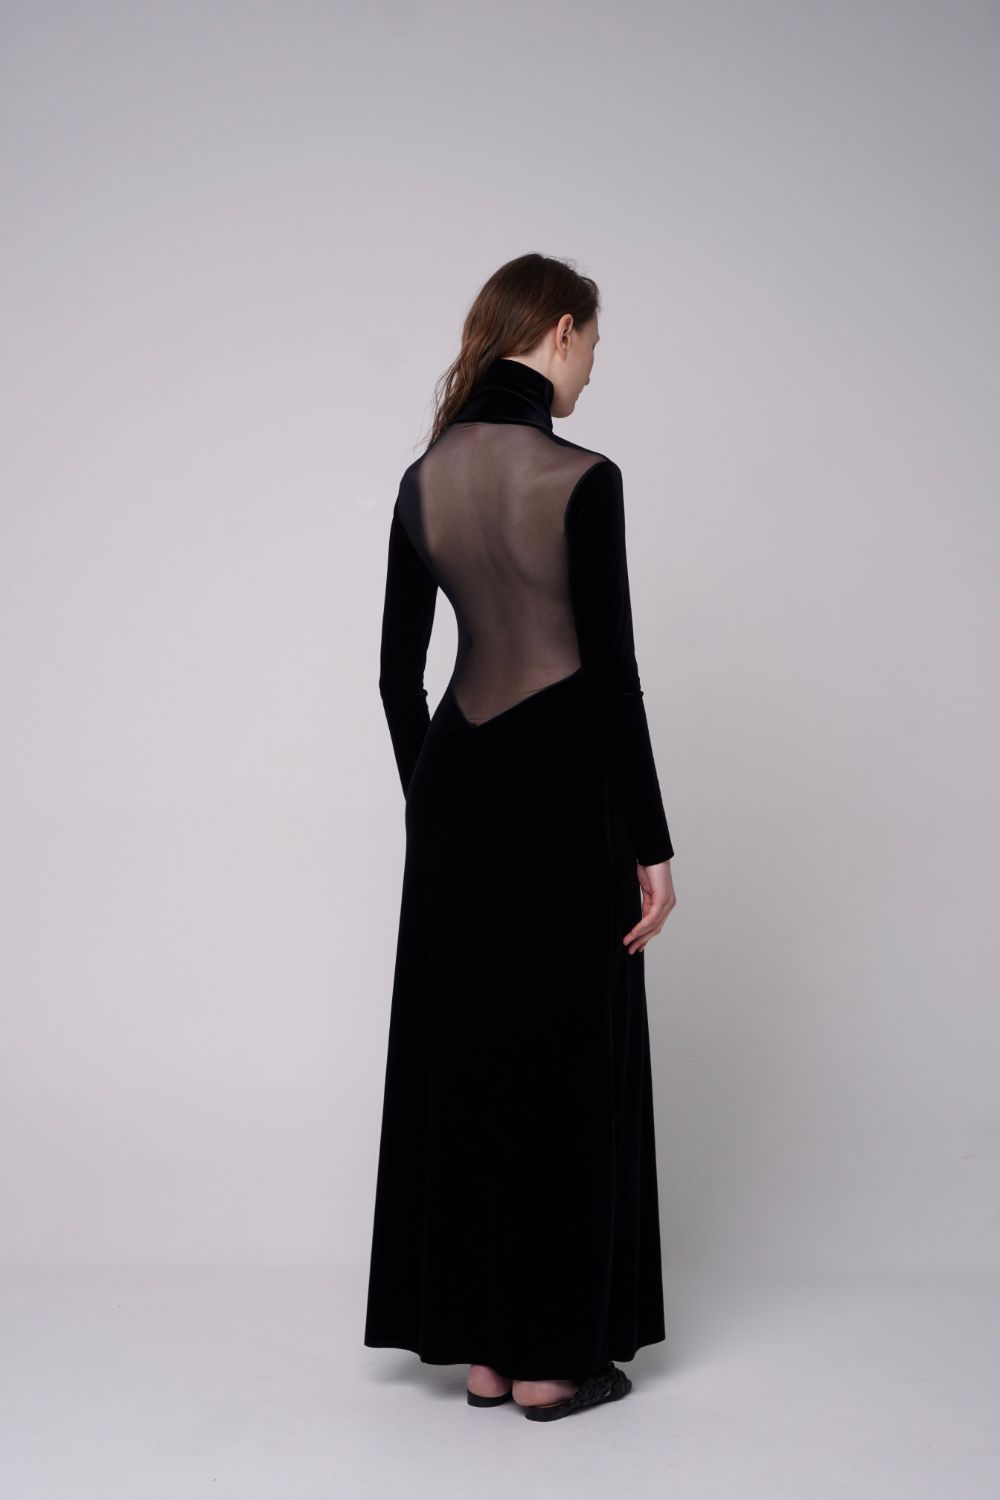  Welcoming Dress Black Product SIA Glamoralle